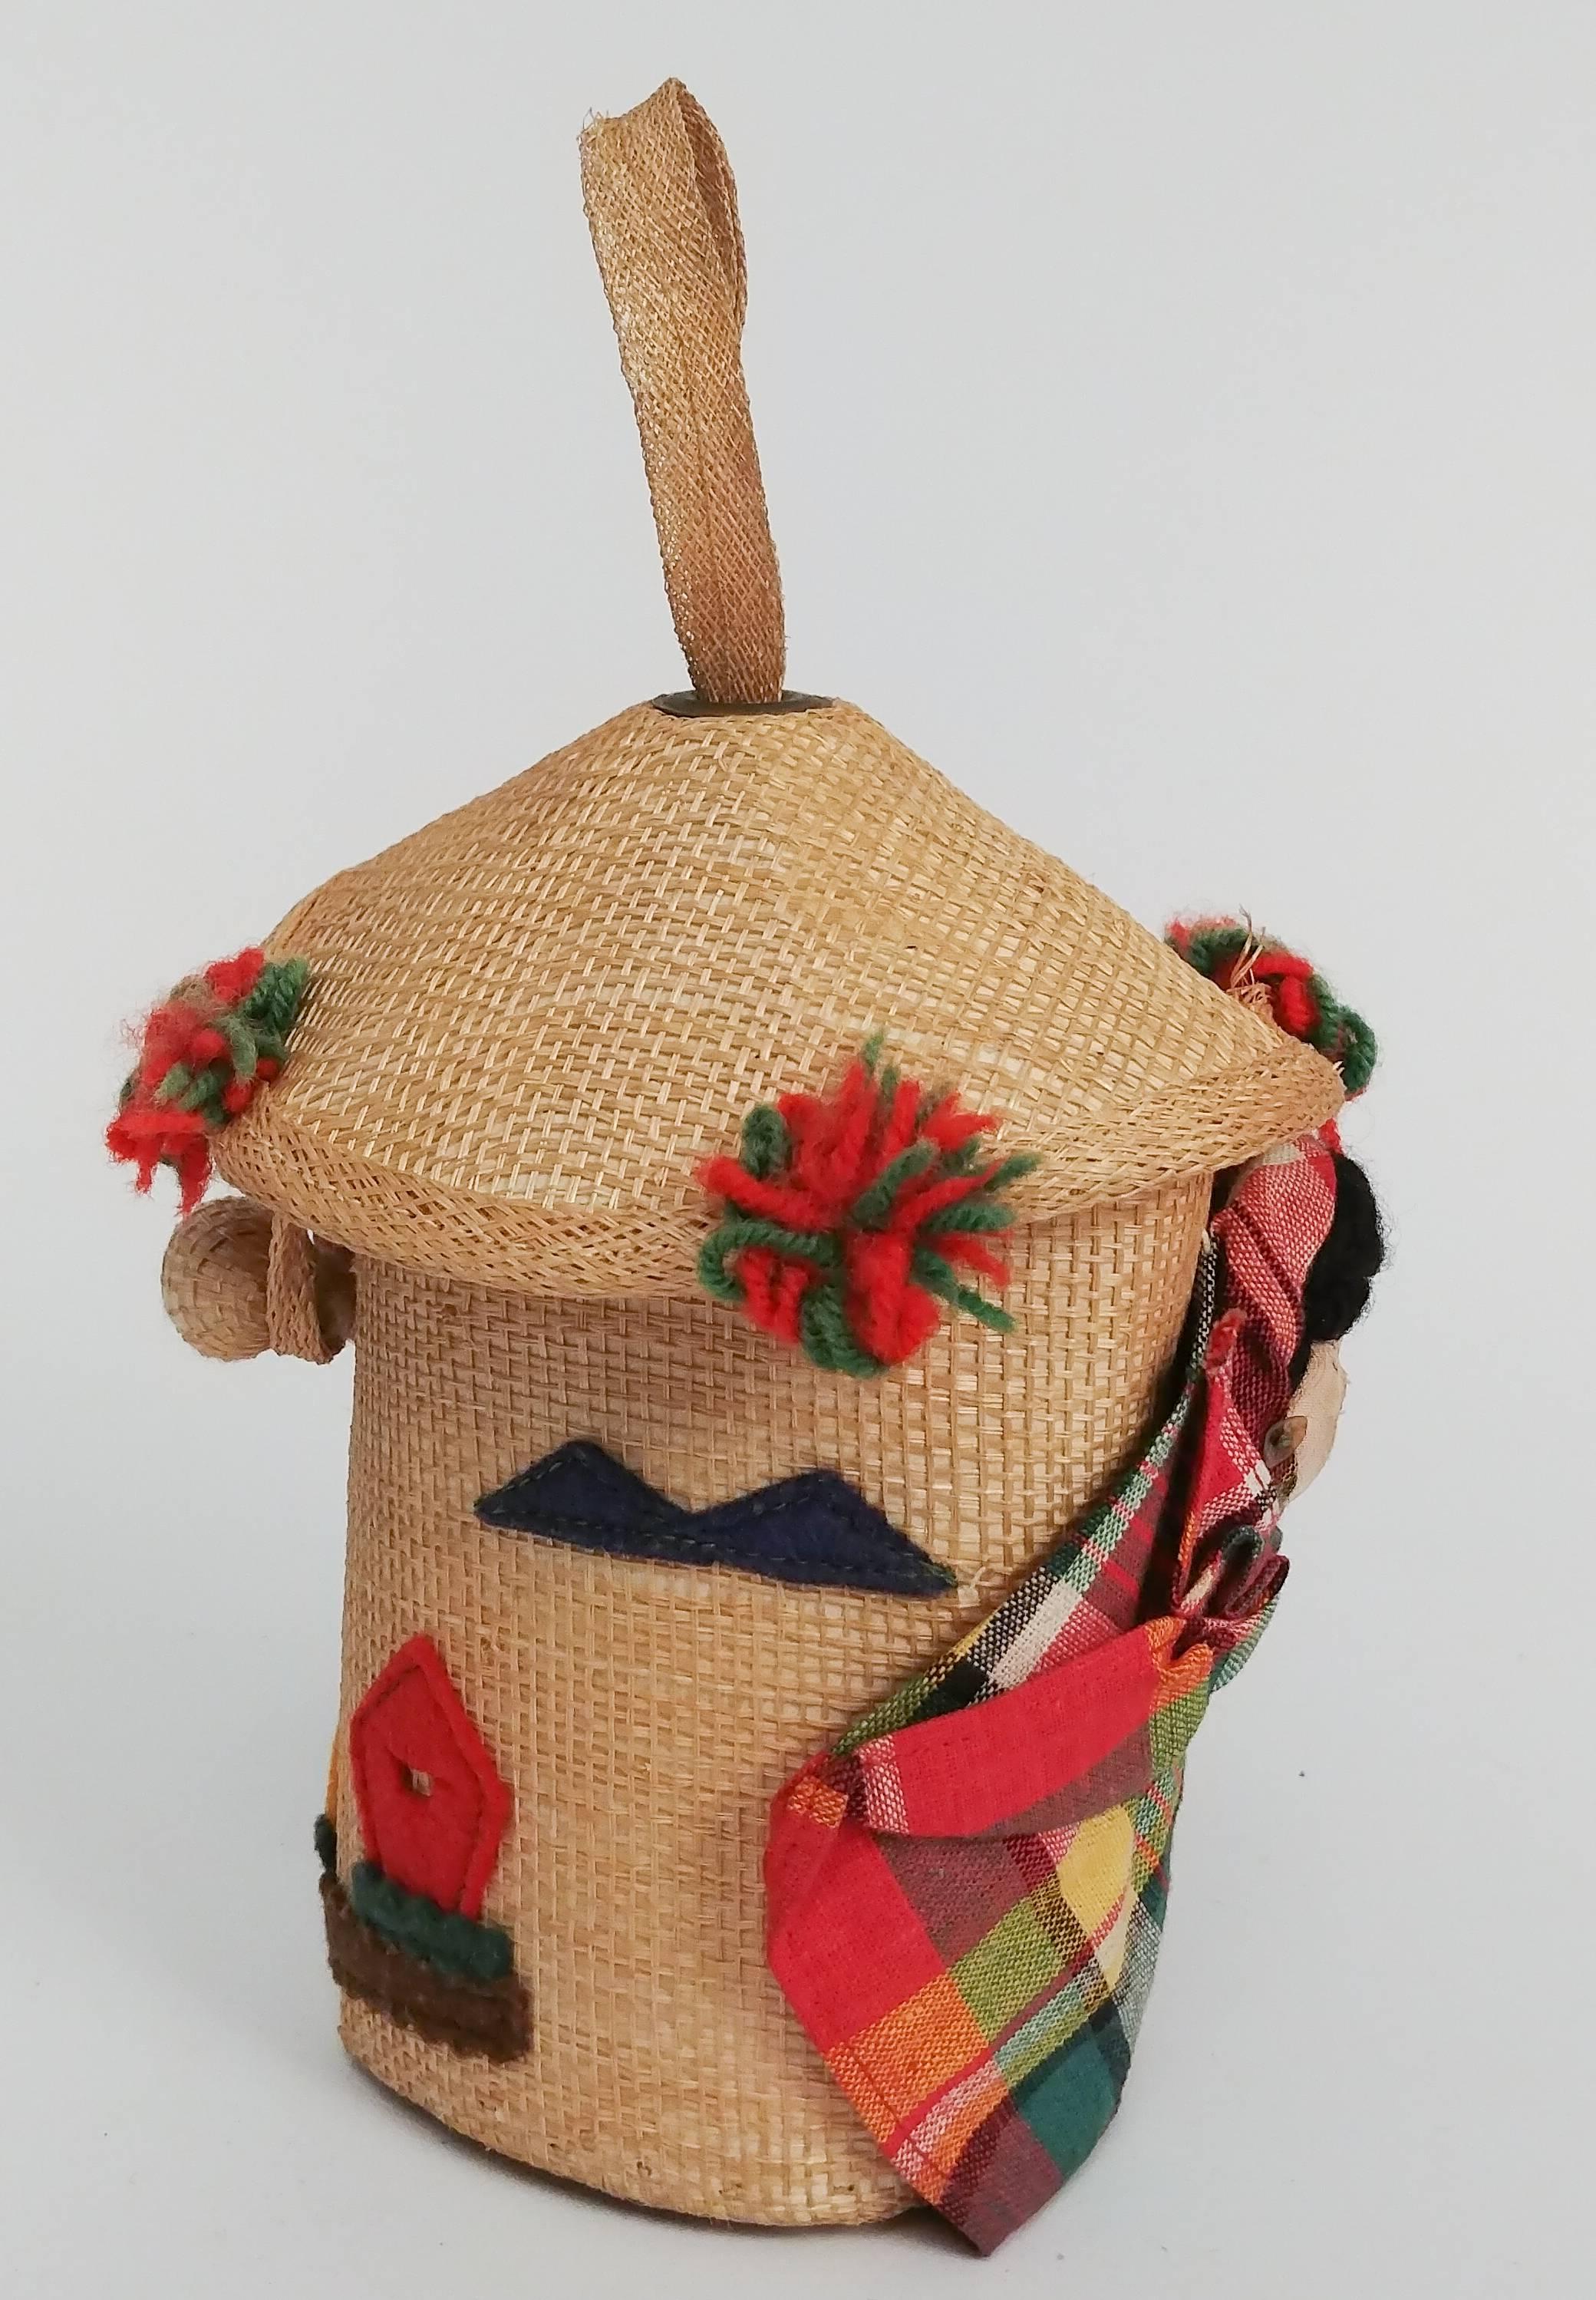 1950s Mexican Souvenir Doll Purse. Adorable mini woven straw purse with whimsical three dimensional details, including yarn pompoms, felt scenery, seeds, and a wrapped up baby doll. Opens top via loop closure, wristlet strap at top. 